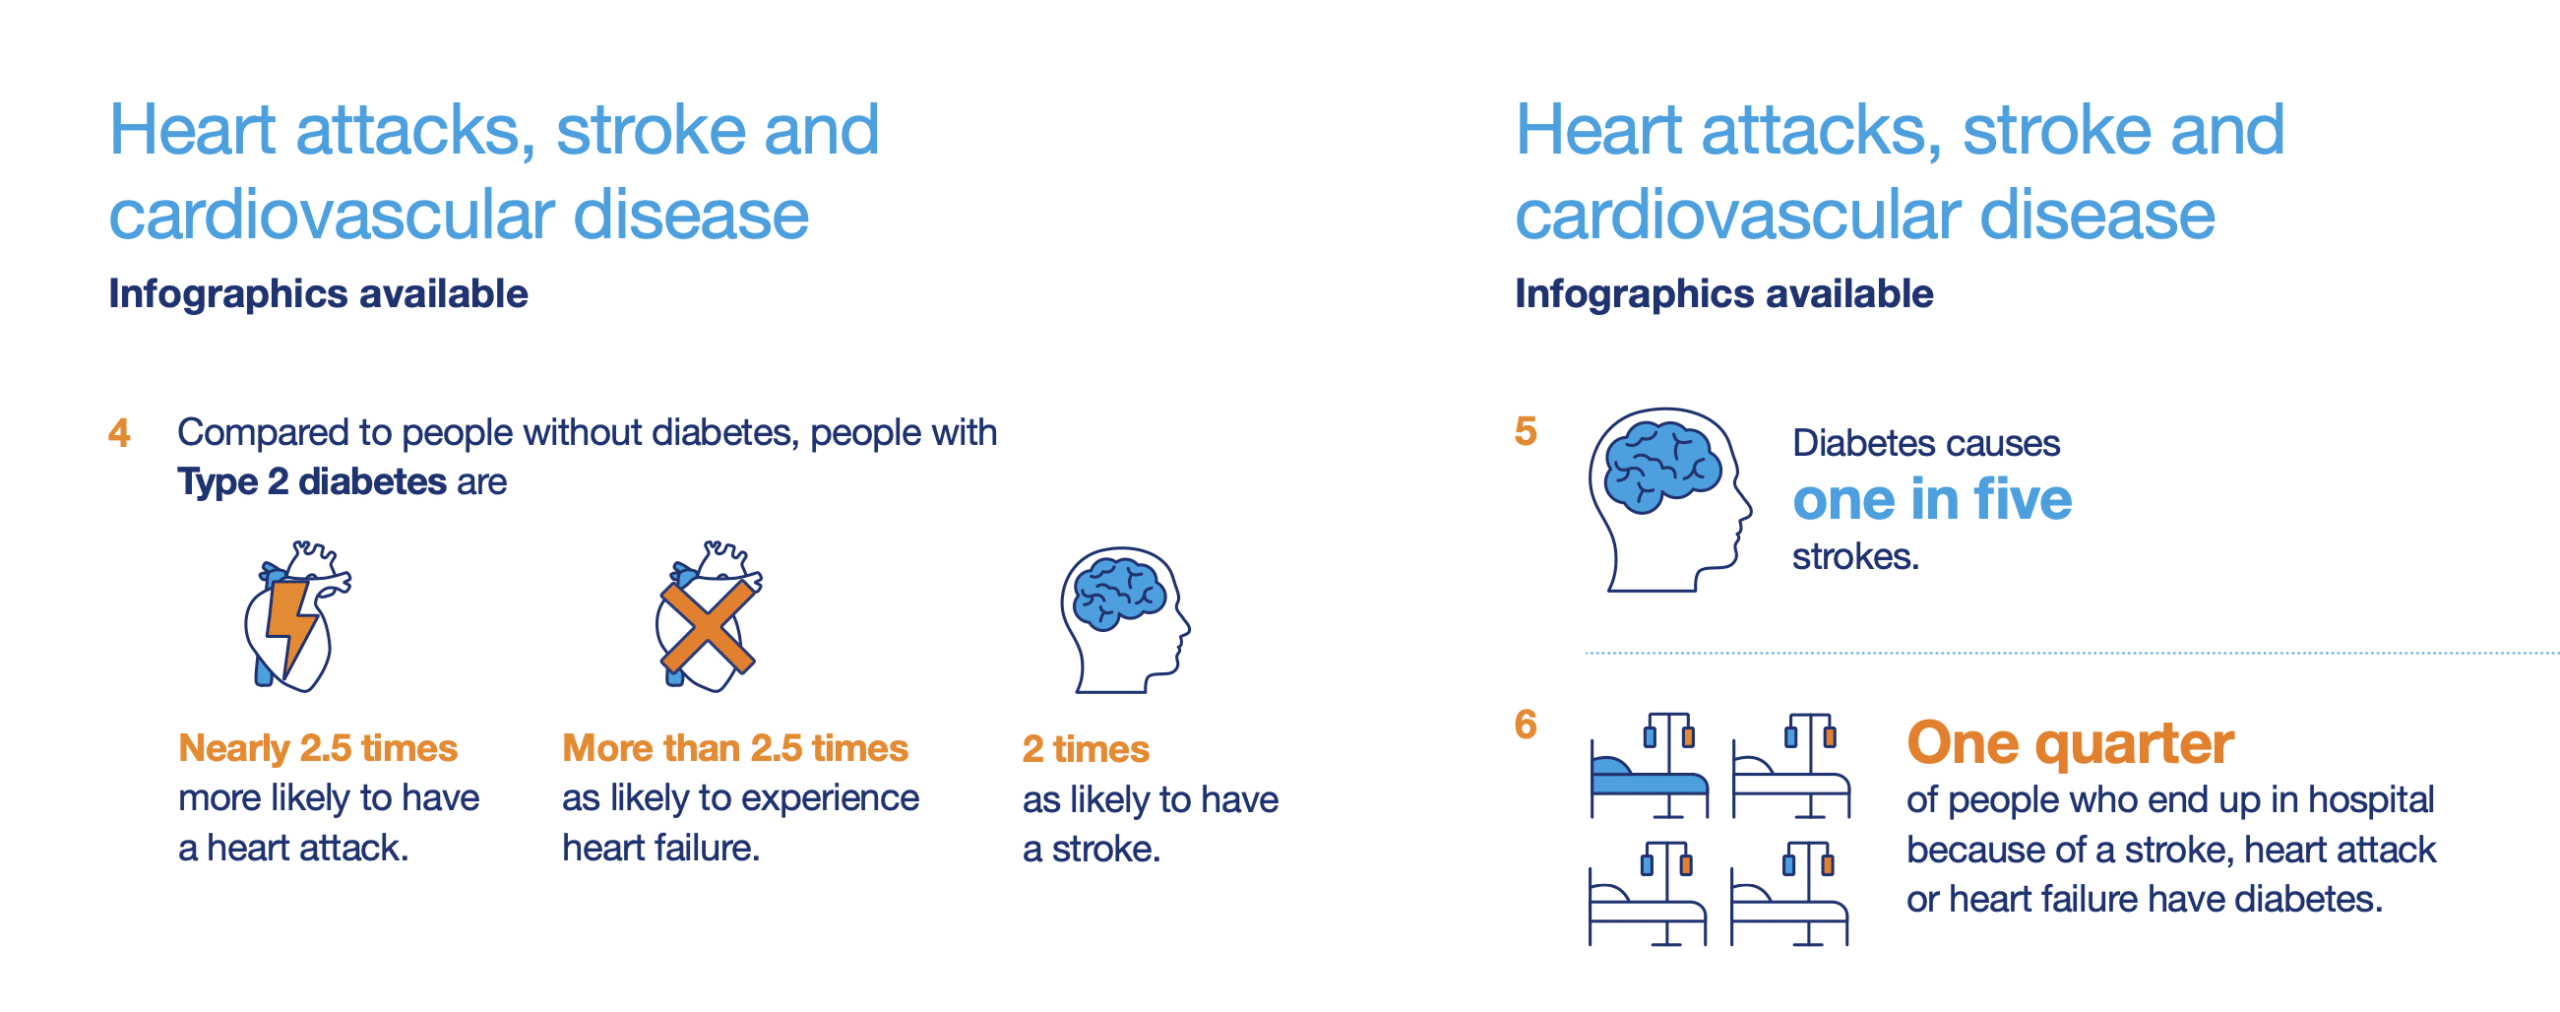 infographic comparing heart attacks, stroke and cardiovascular disease in people with or without diabetes